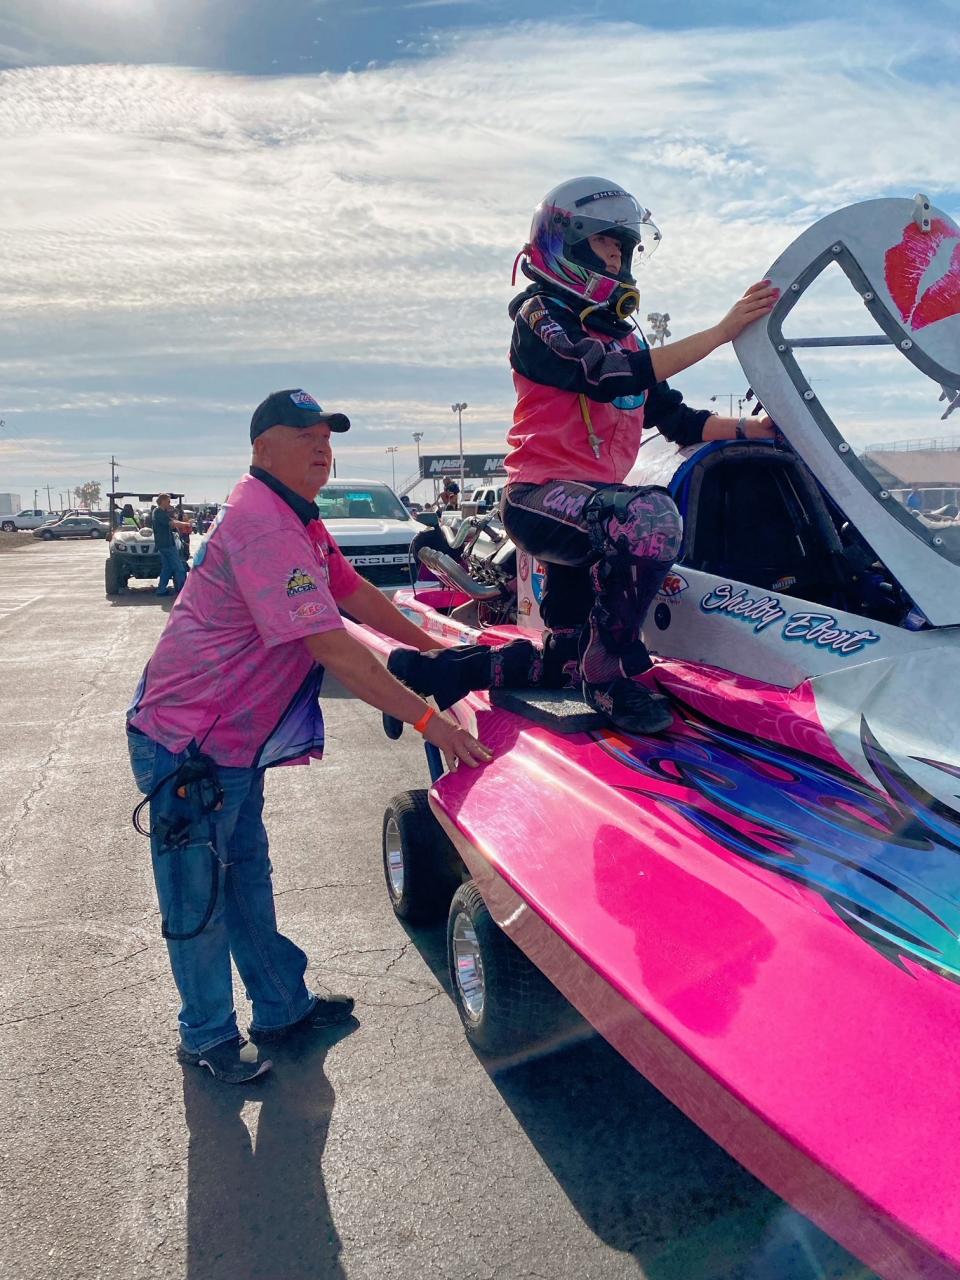 Shelby Ebert started racing when she was 14 years old with jet skis. She now races top-flight speed boats and is one of the fastest in the business.